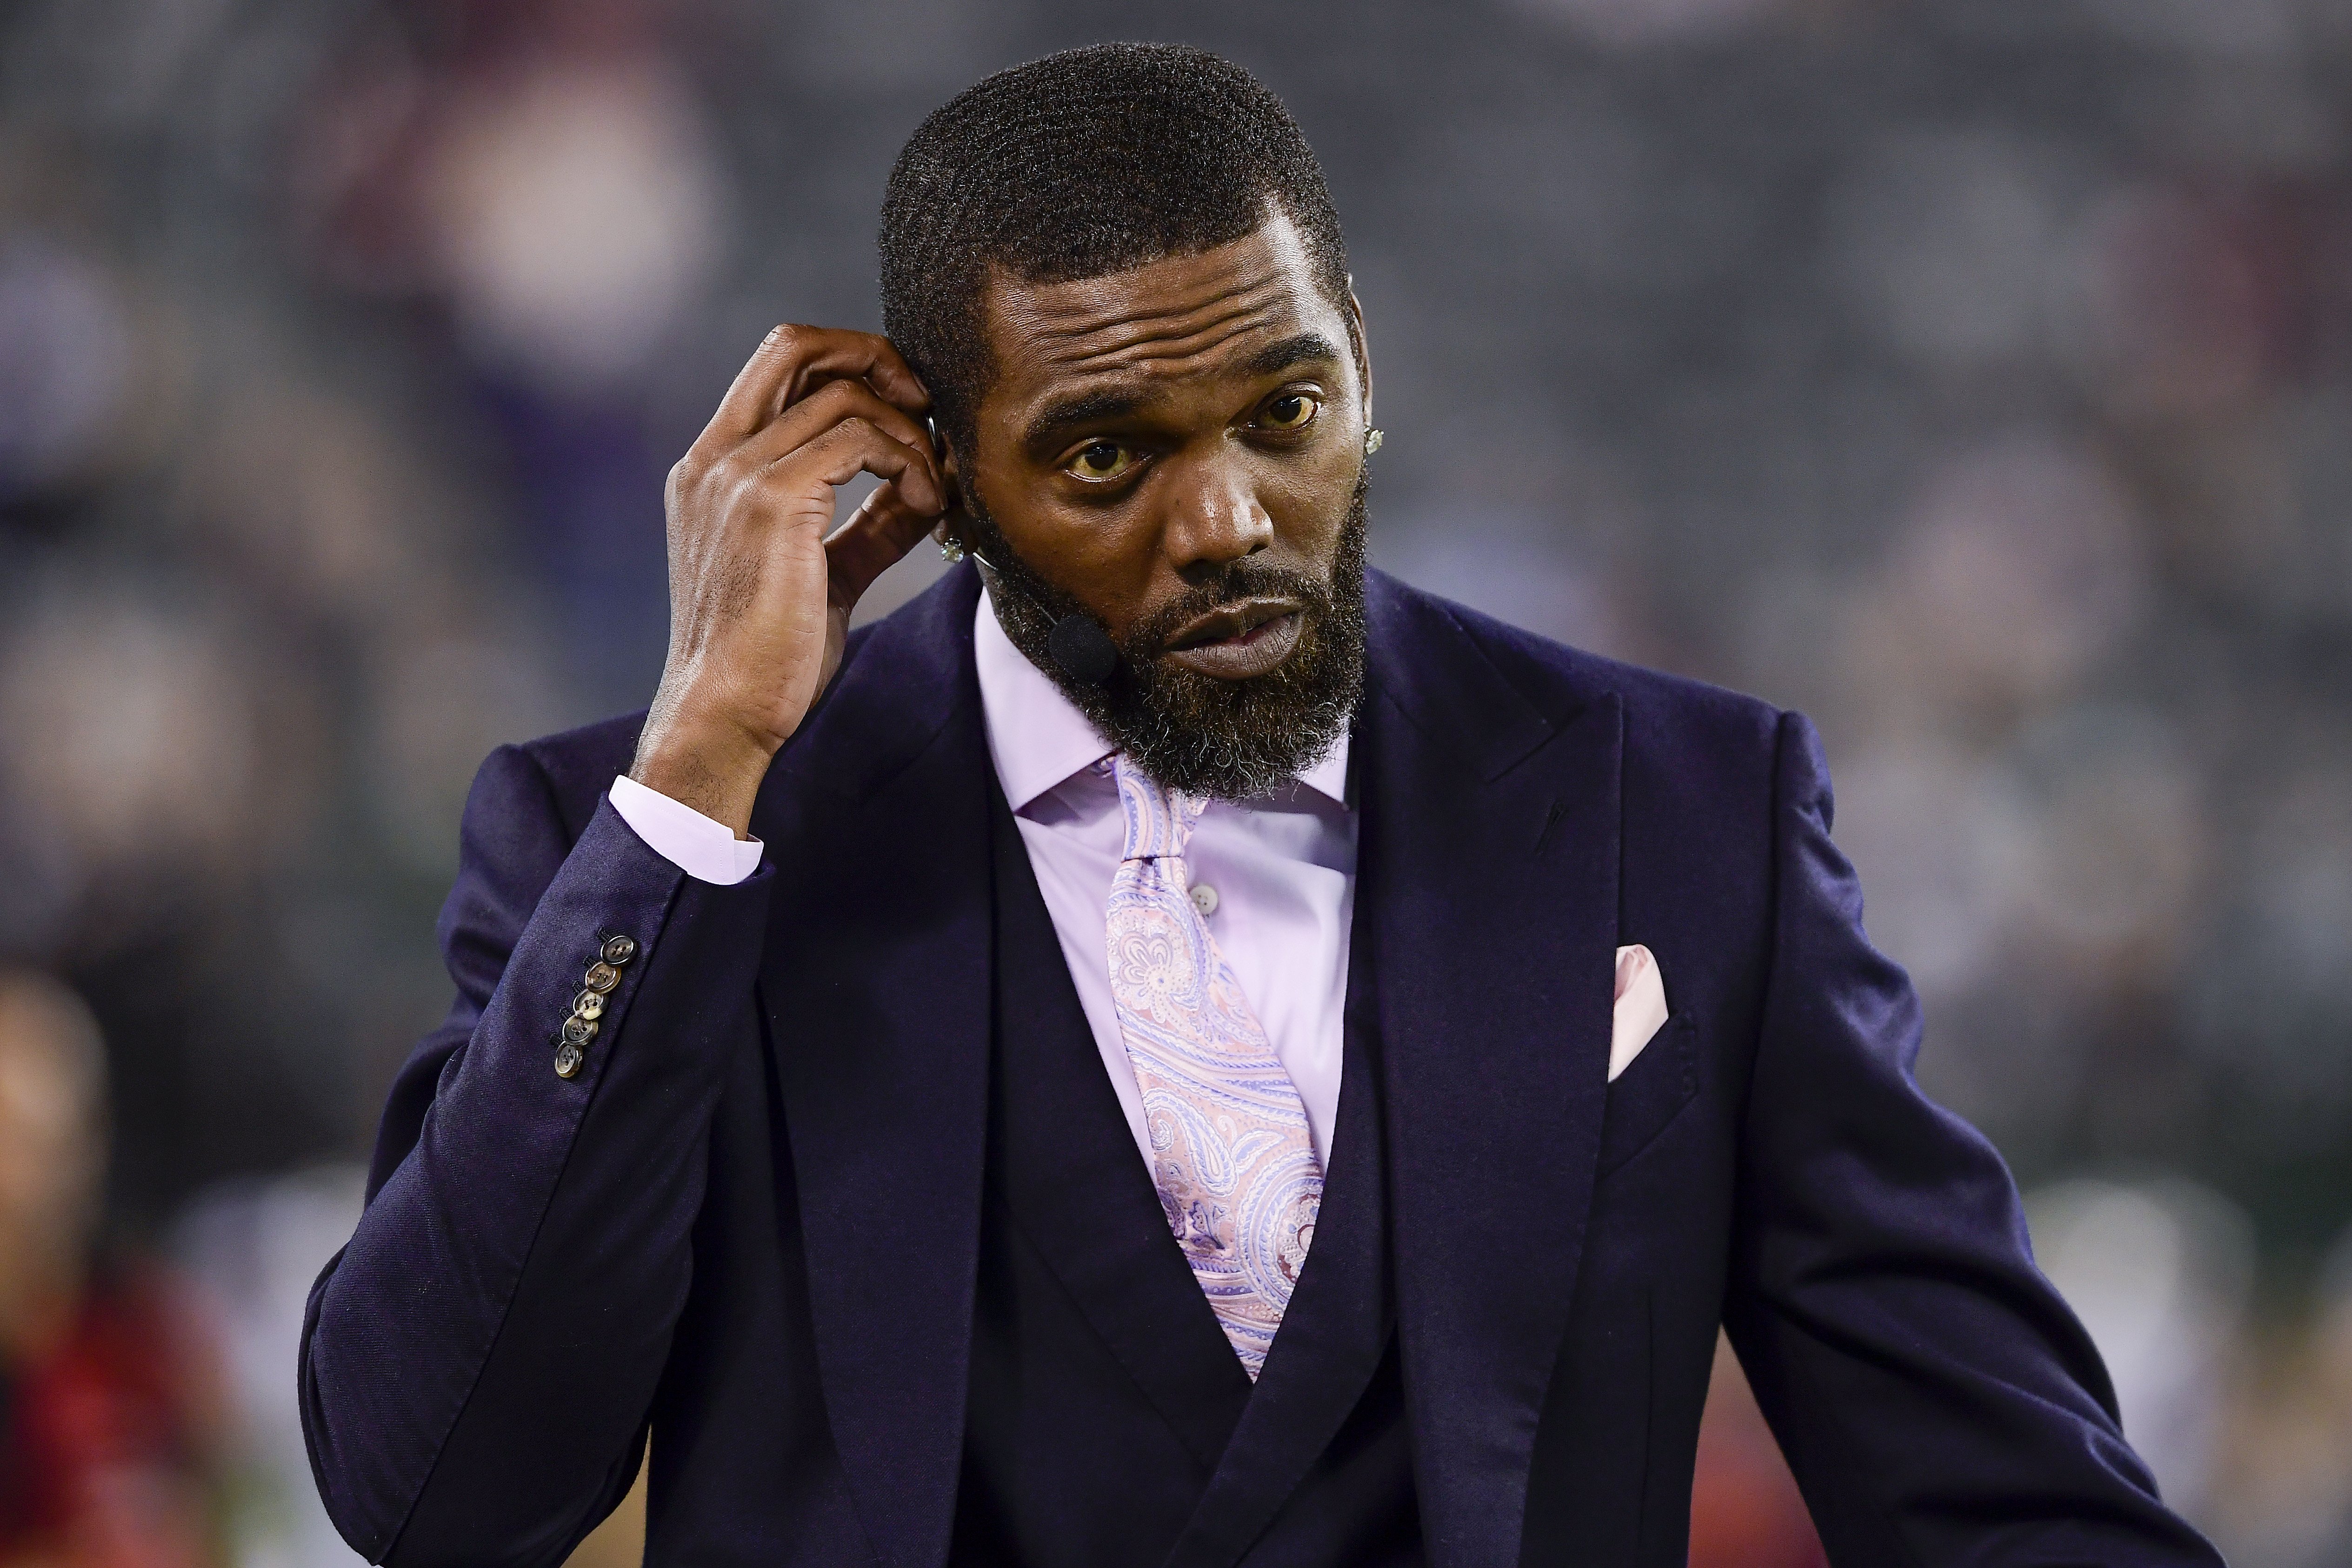 Randy Moss at MetLife Stadium on October 21, 2019 | Photo: Getty Images